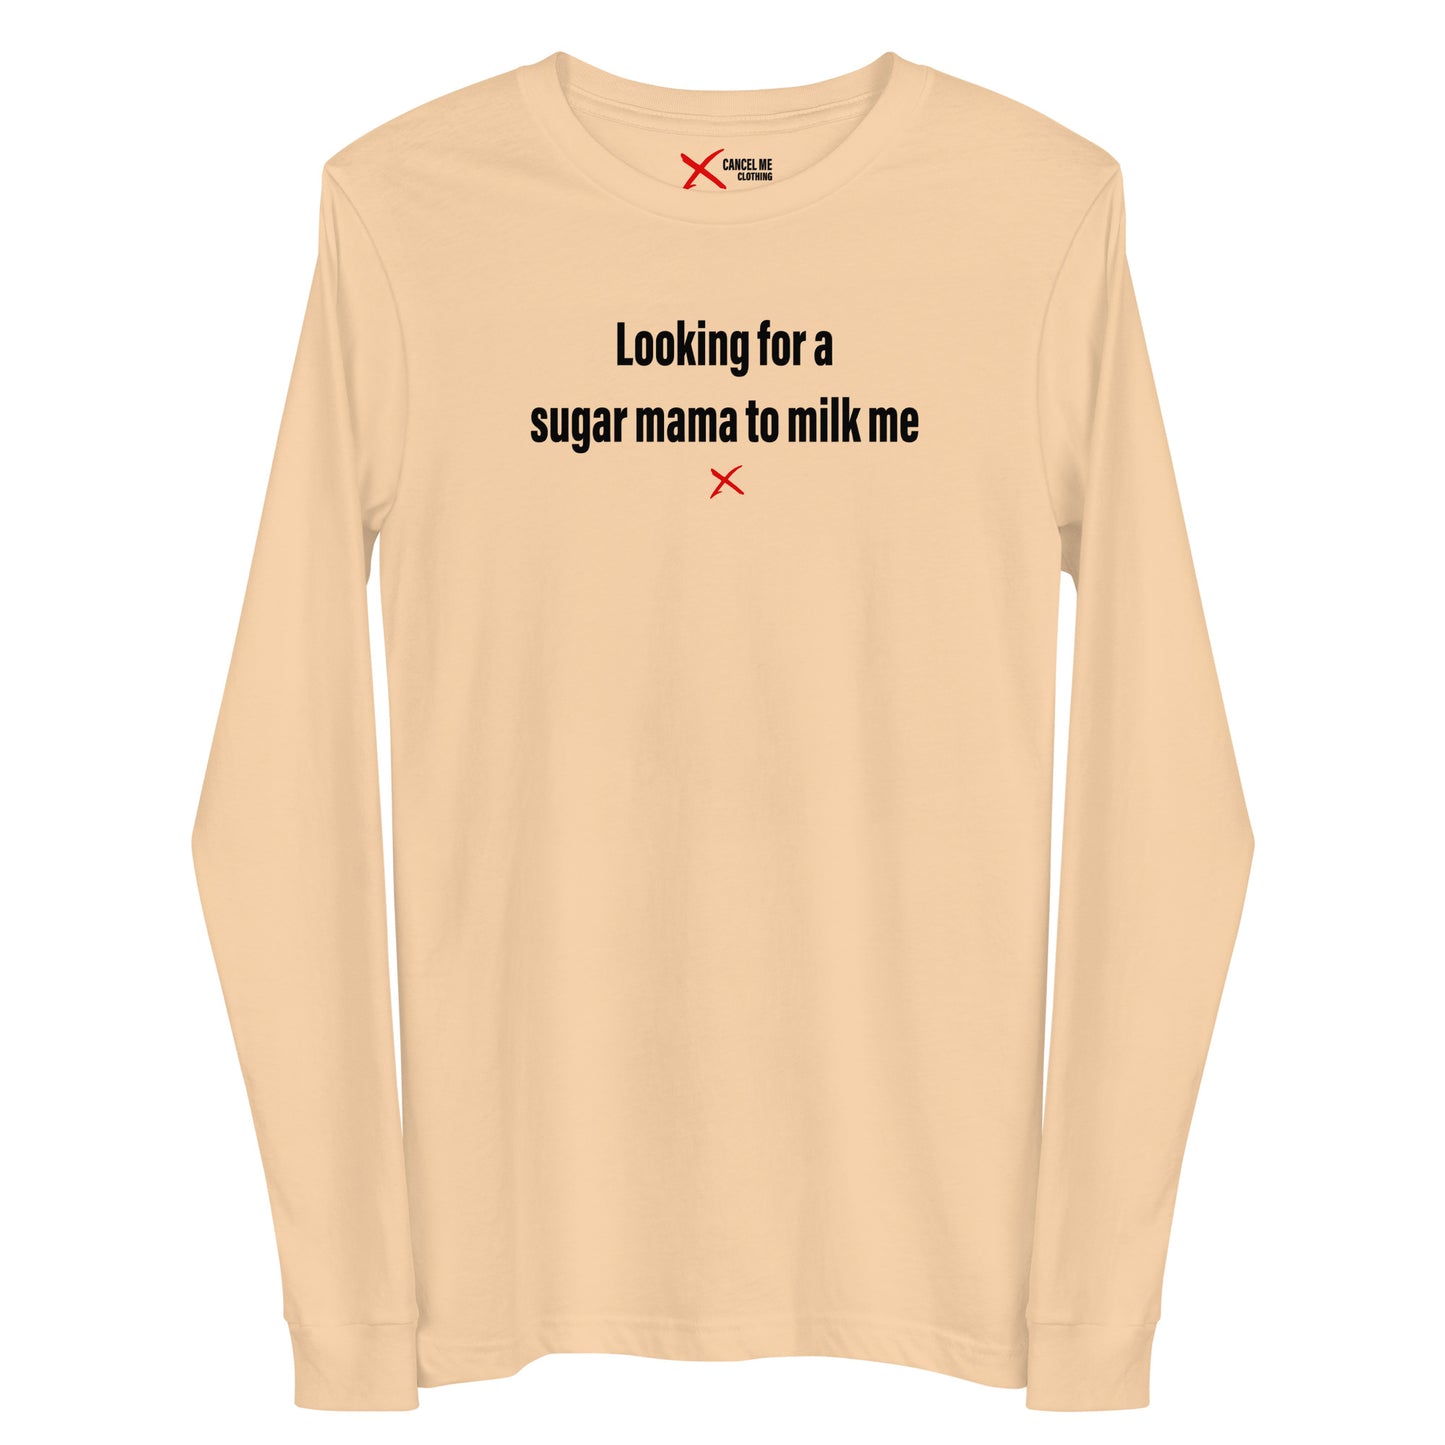 Looking for a sugar mama to milk me - Longsleeve